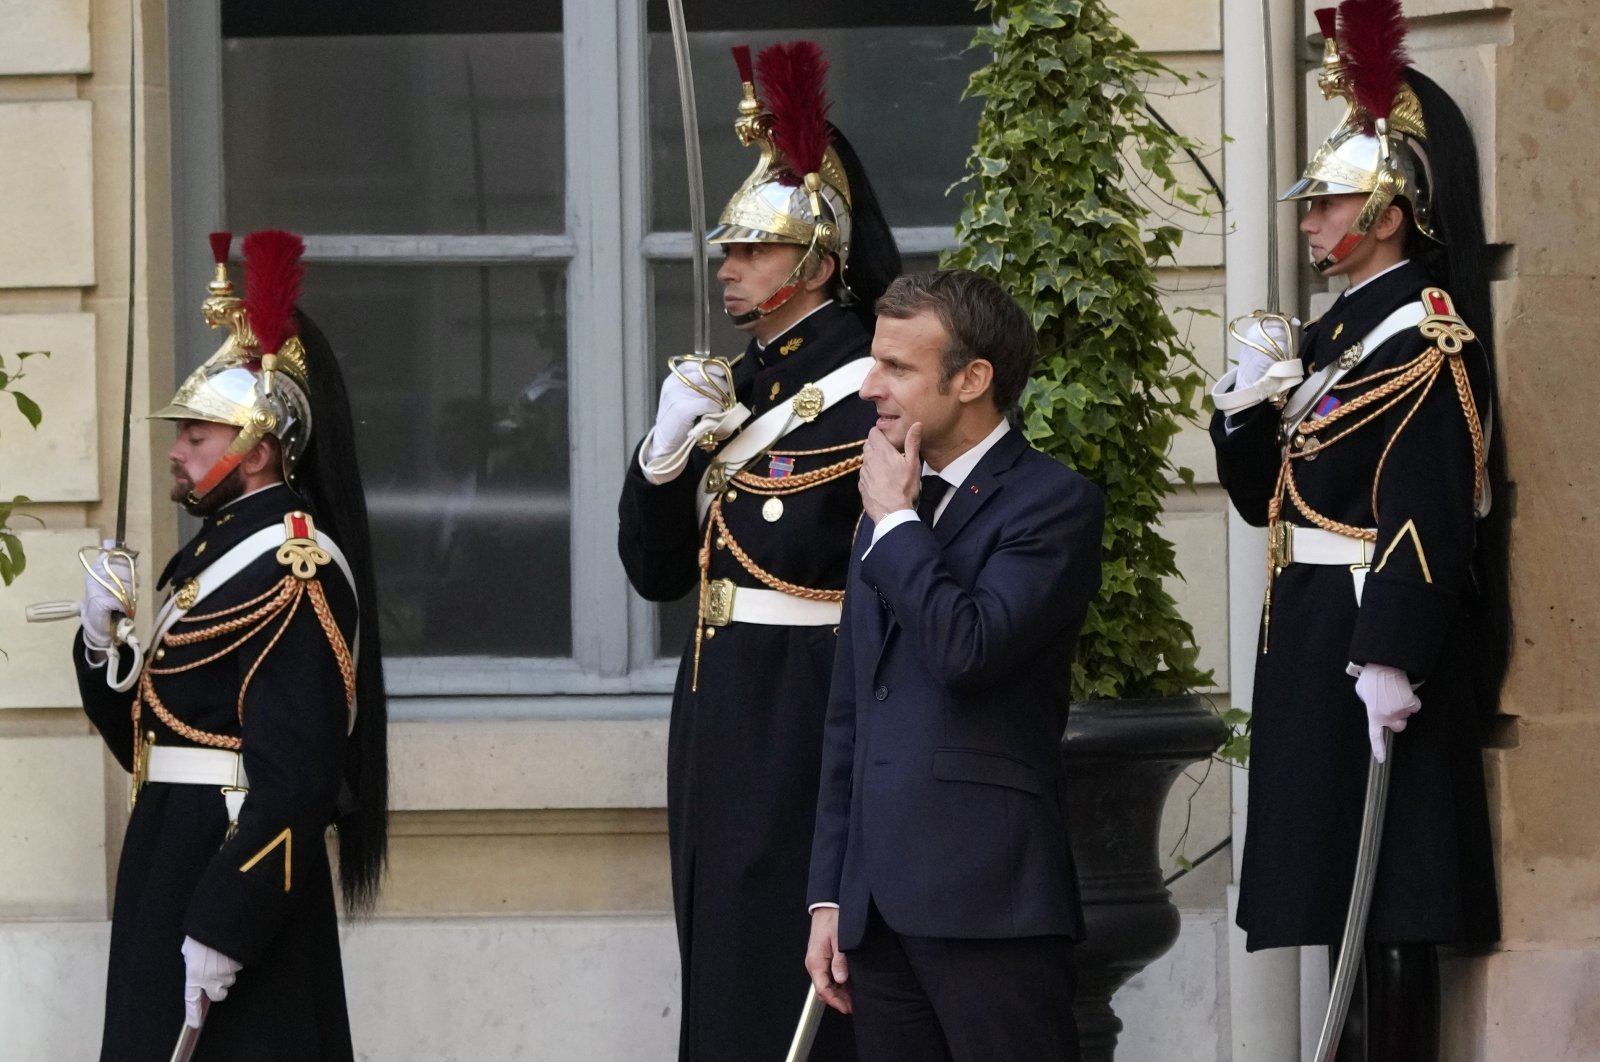 France's President Emmanuel Macron waits for world leaders before a conference in Paris, Friday, Nov. 12, 2021. (AP Photo)